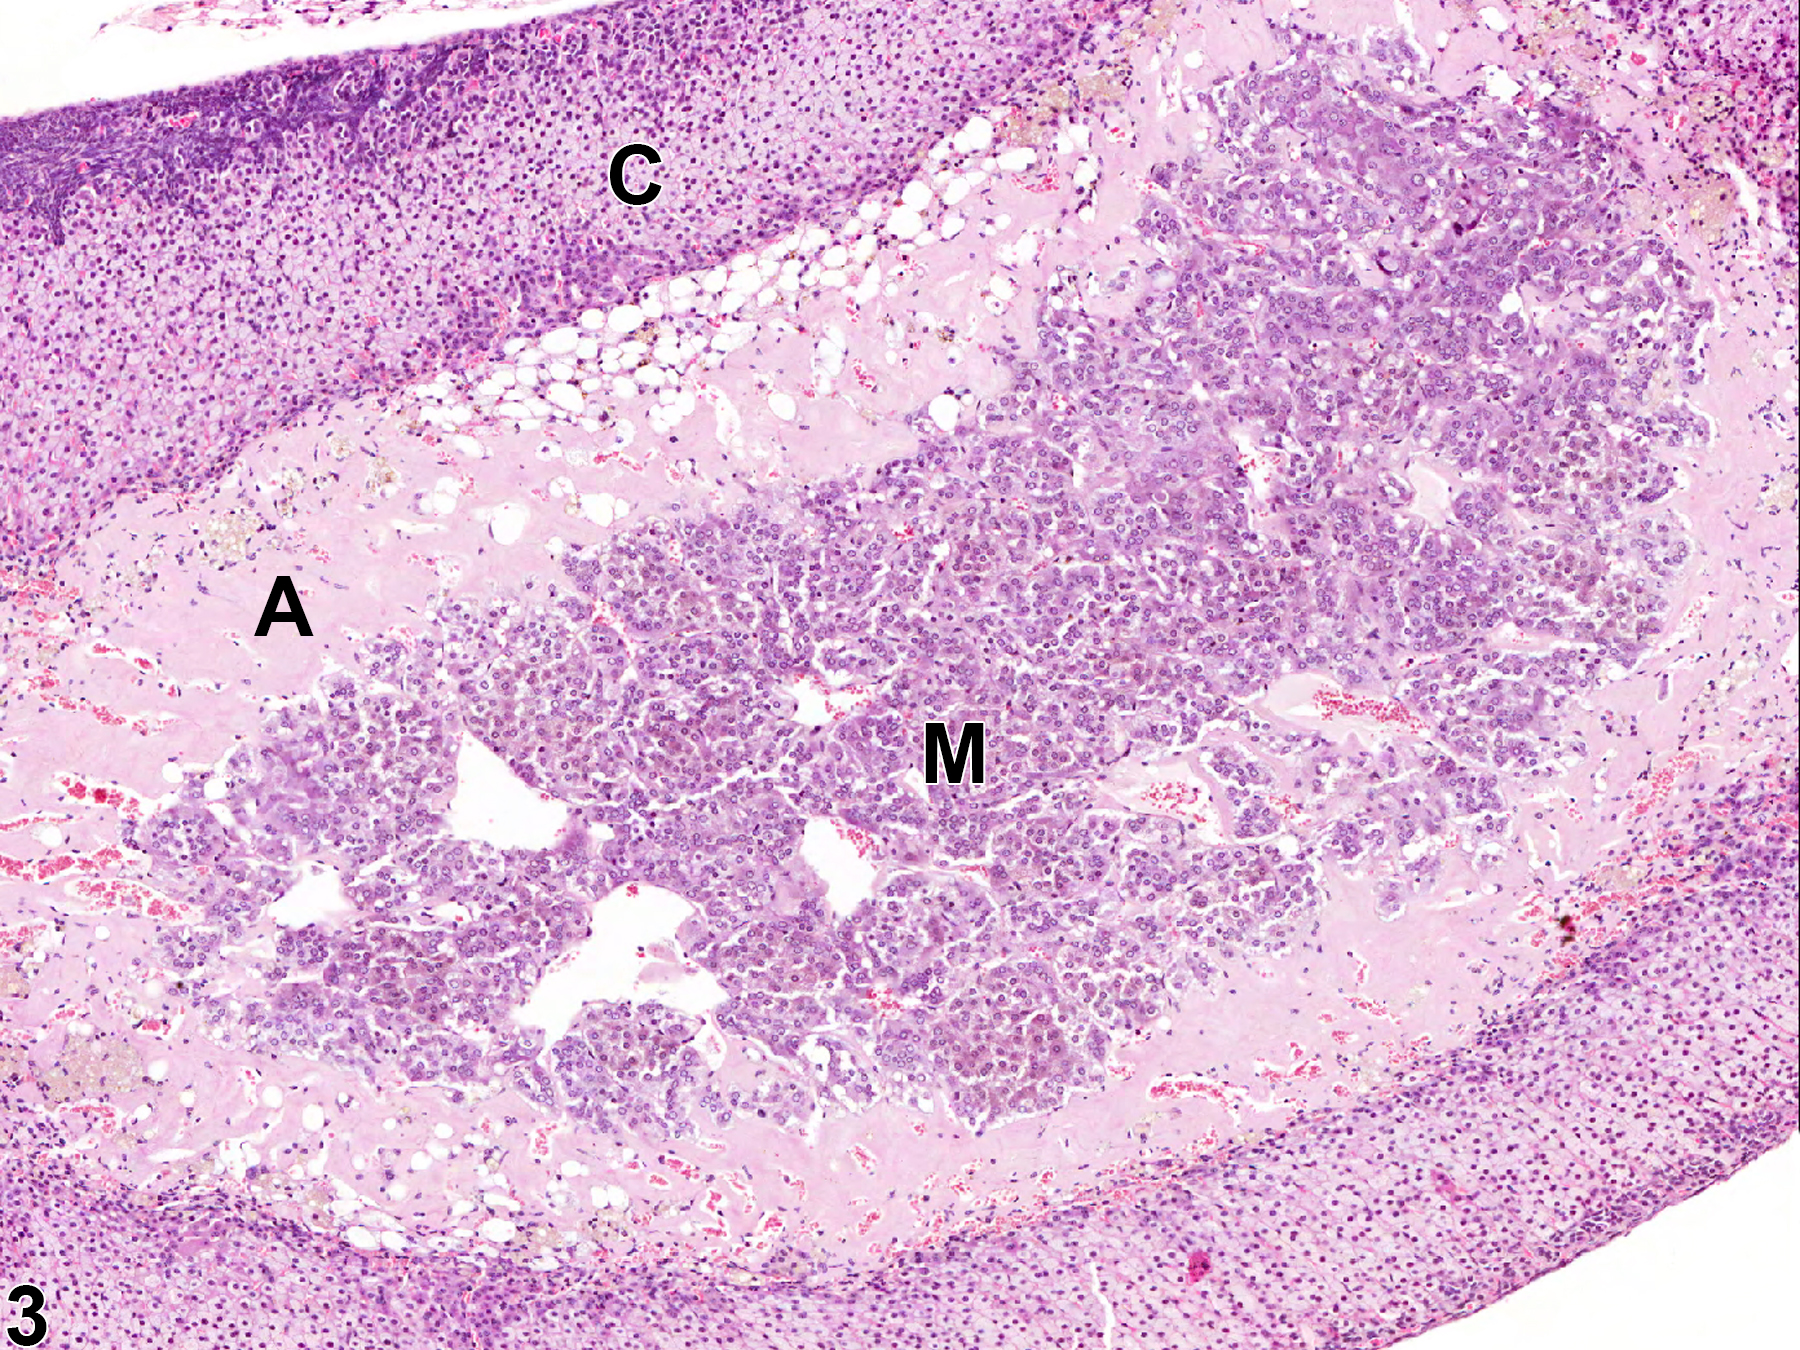 Image of amyloid in the adrenal gland from a male Swiss Webster mouse in a chronic study